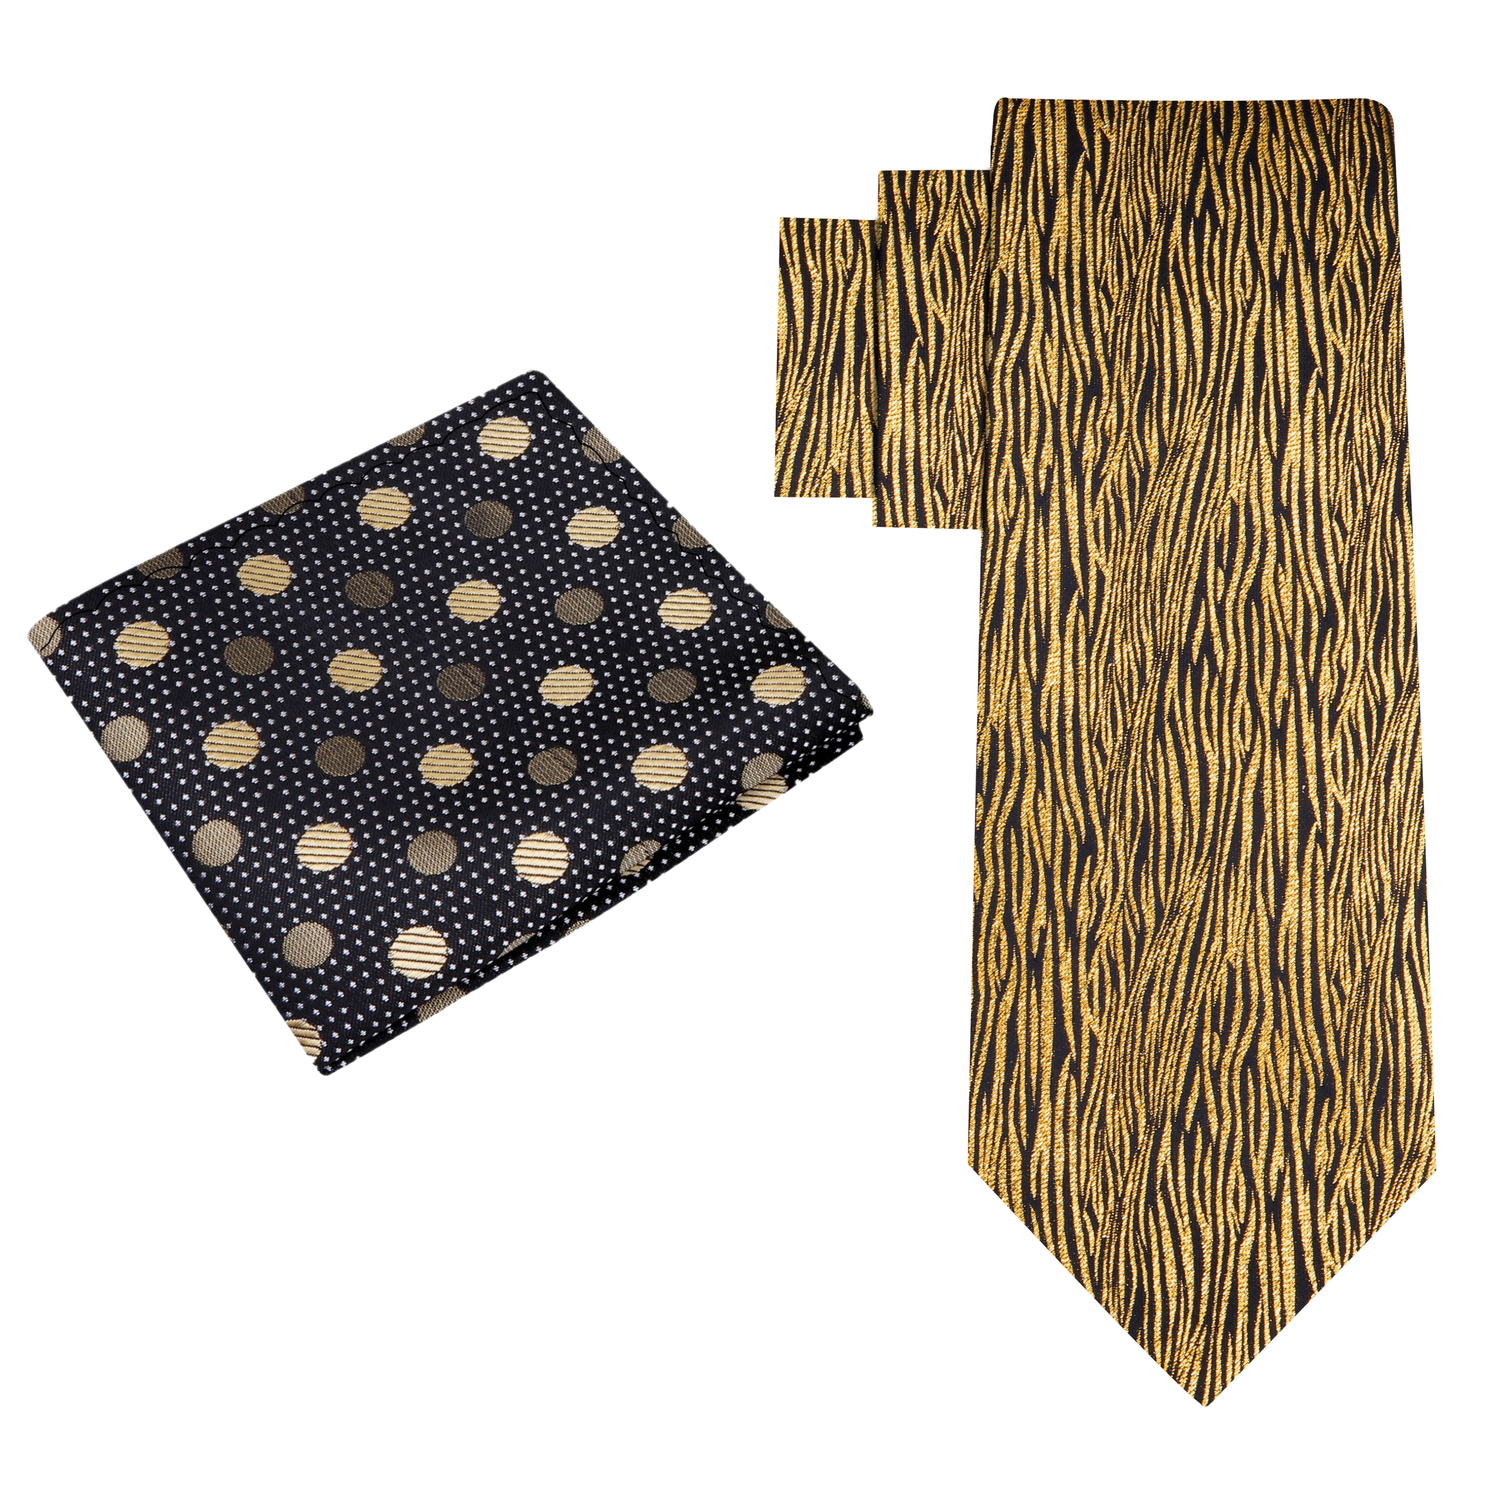 Alt View: Black and Gold Zebra Tie and Accenting Black Gold Polka Pocket Square